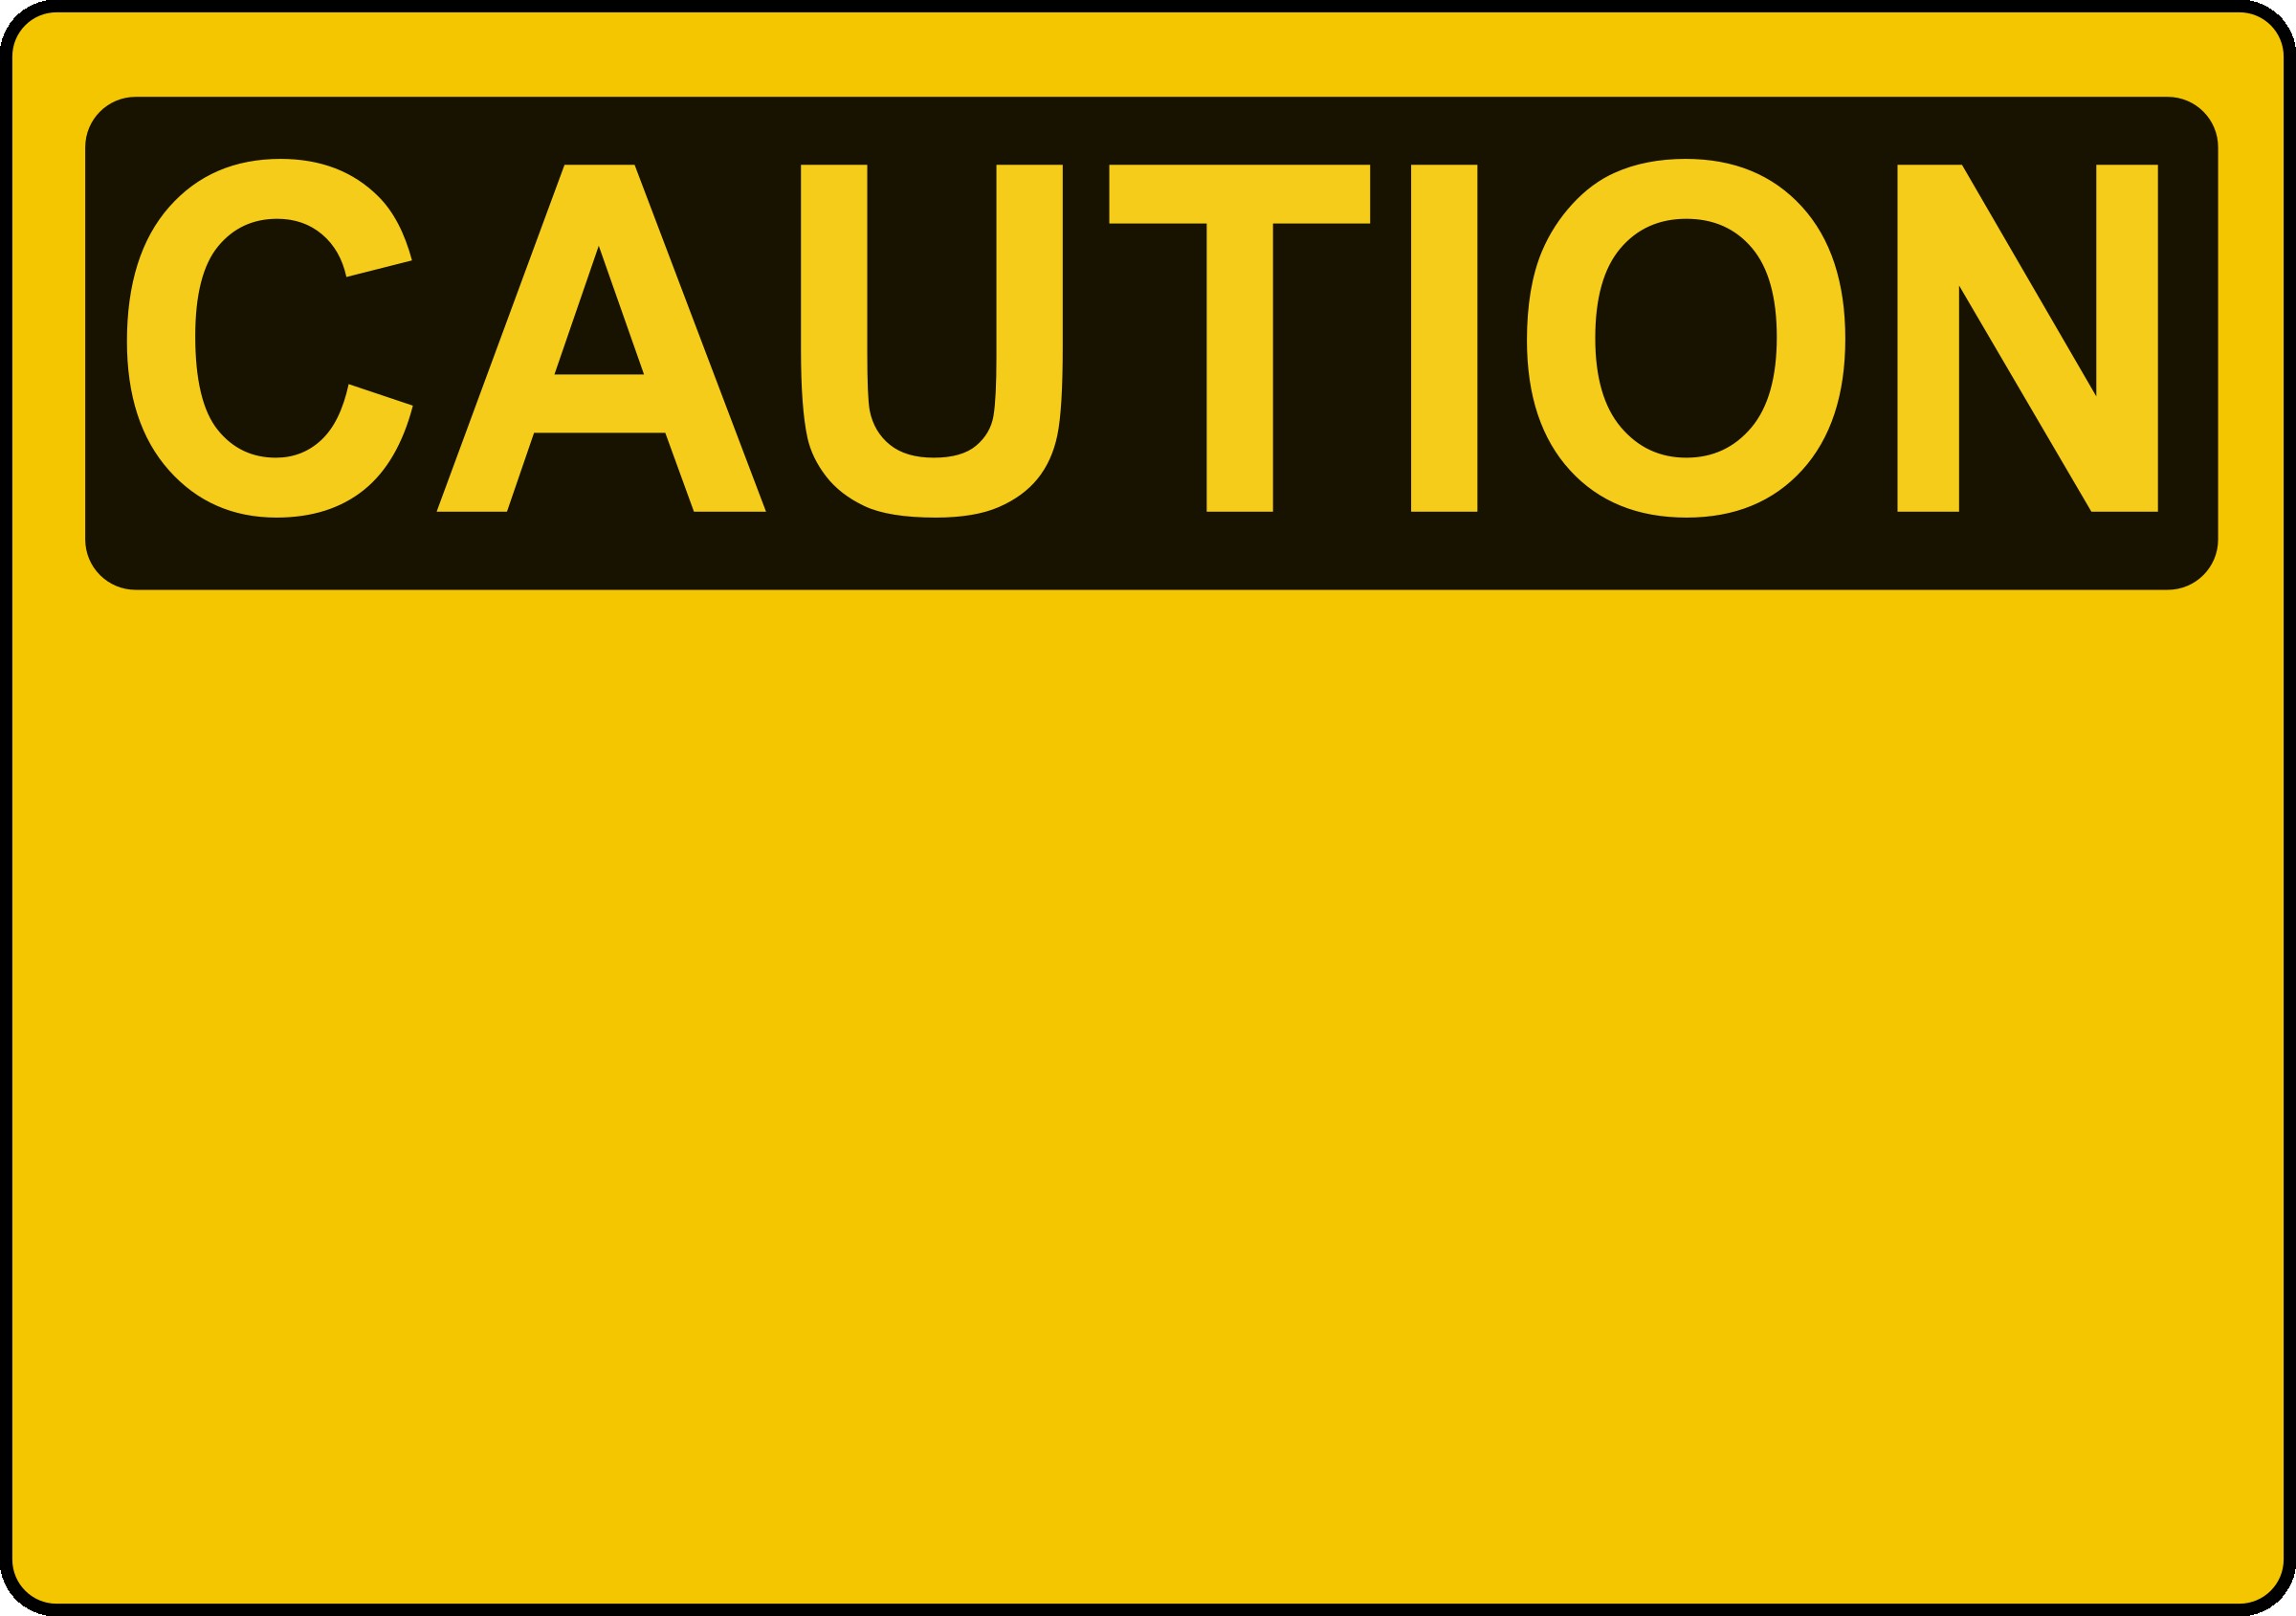 Caution Sign Template By Rones On Safety Templates